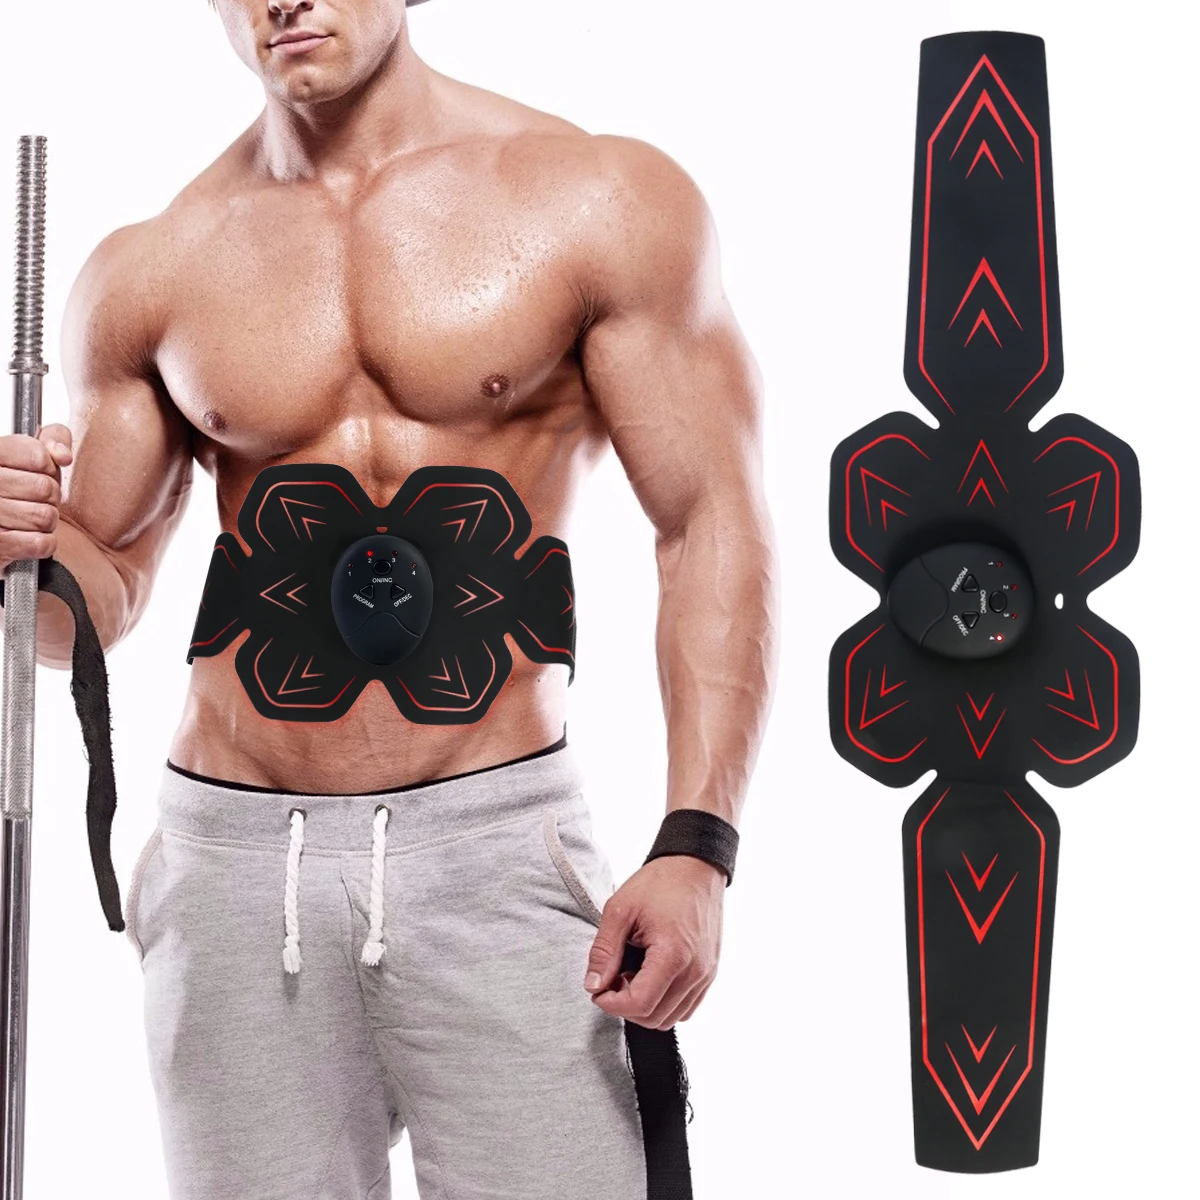 

Electronic Powerful Vibration Abs Trainer Muscle Toner Belt Ems Training The Body Ultimate Abs Stimulator For Abdomen